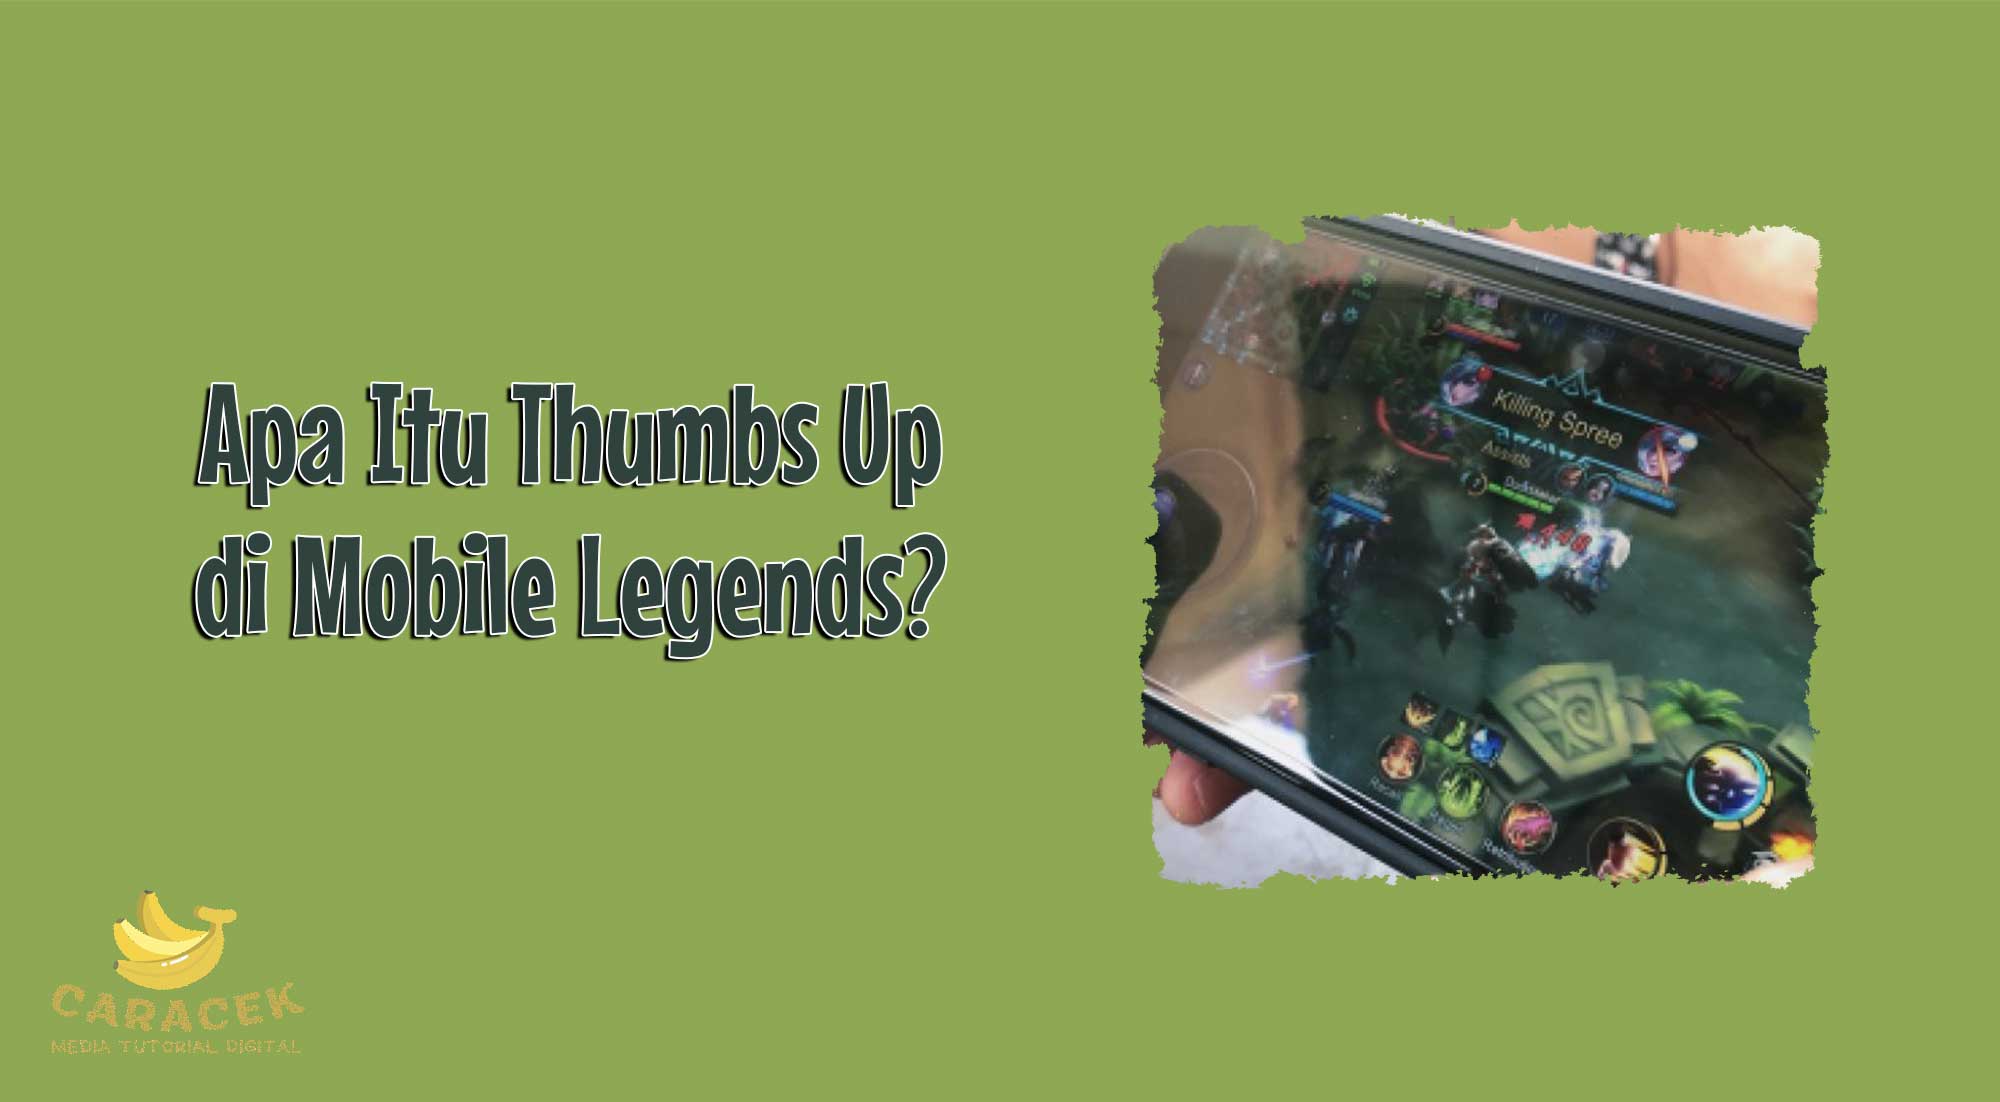 Thumbs-Up-Mobile-Legends